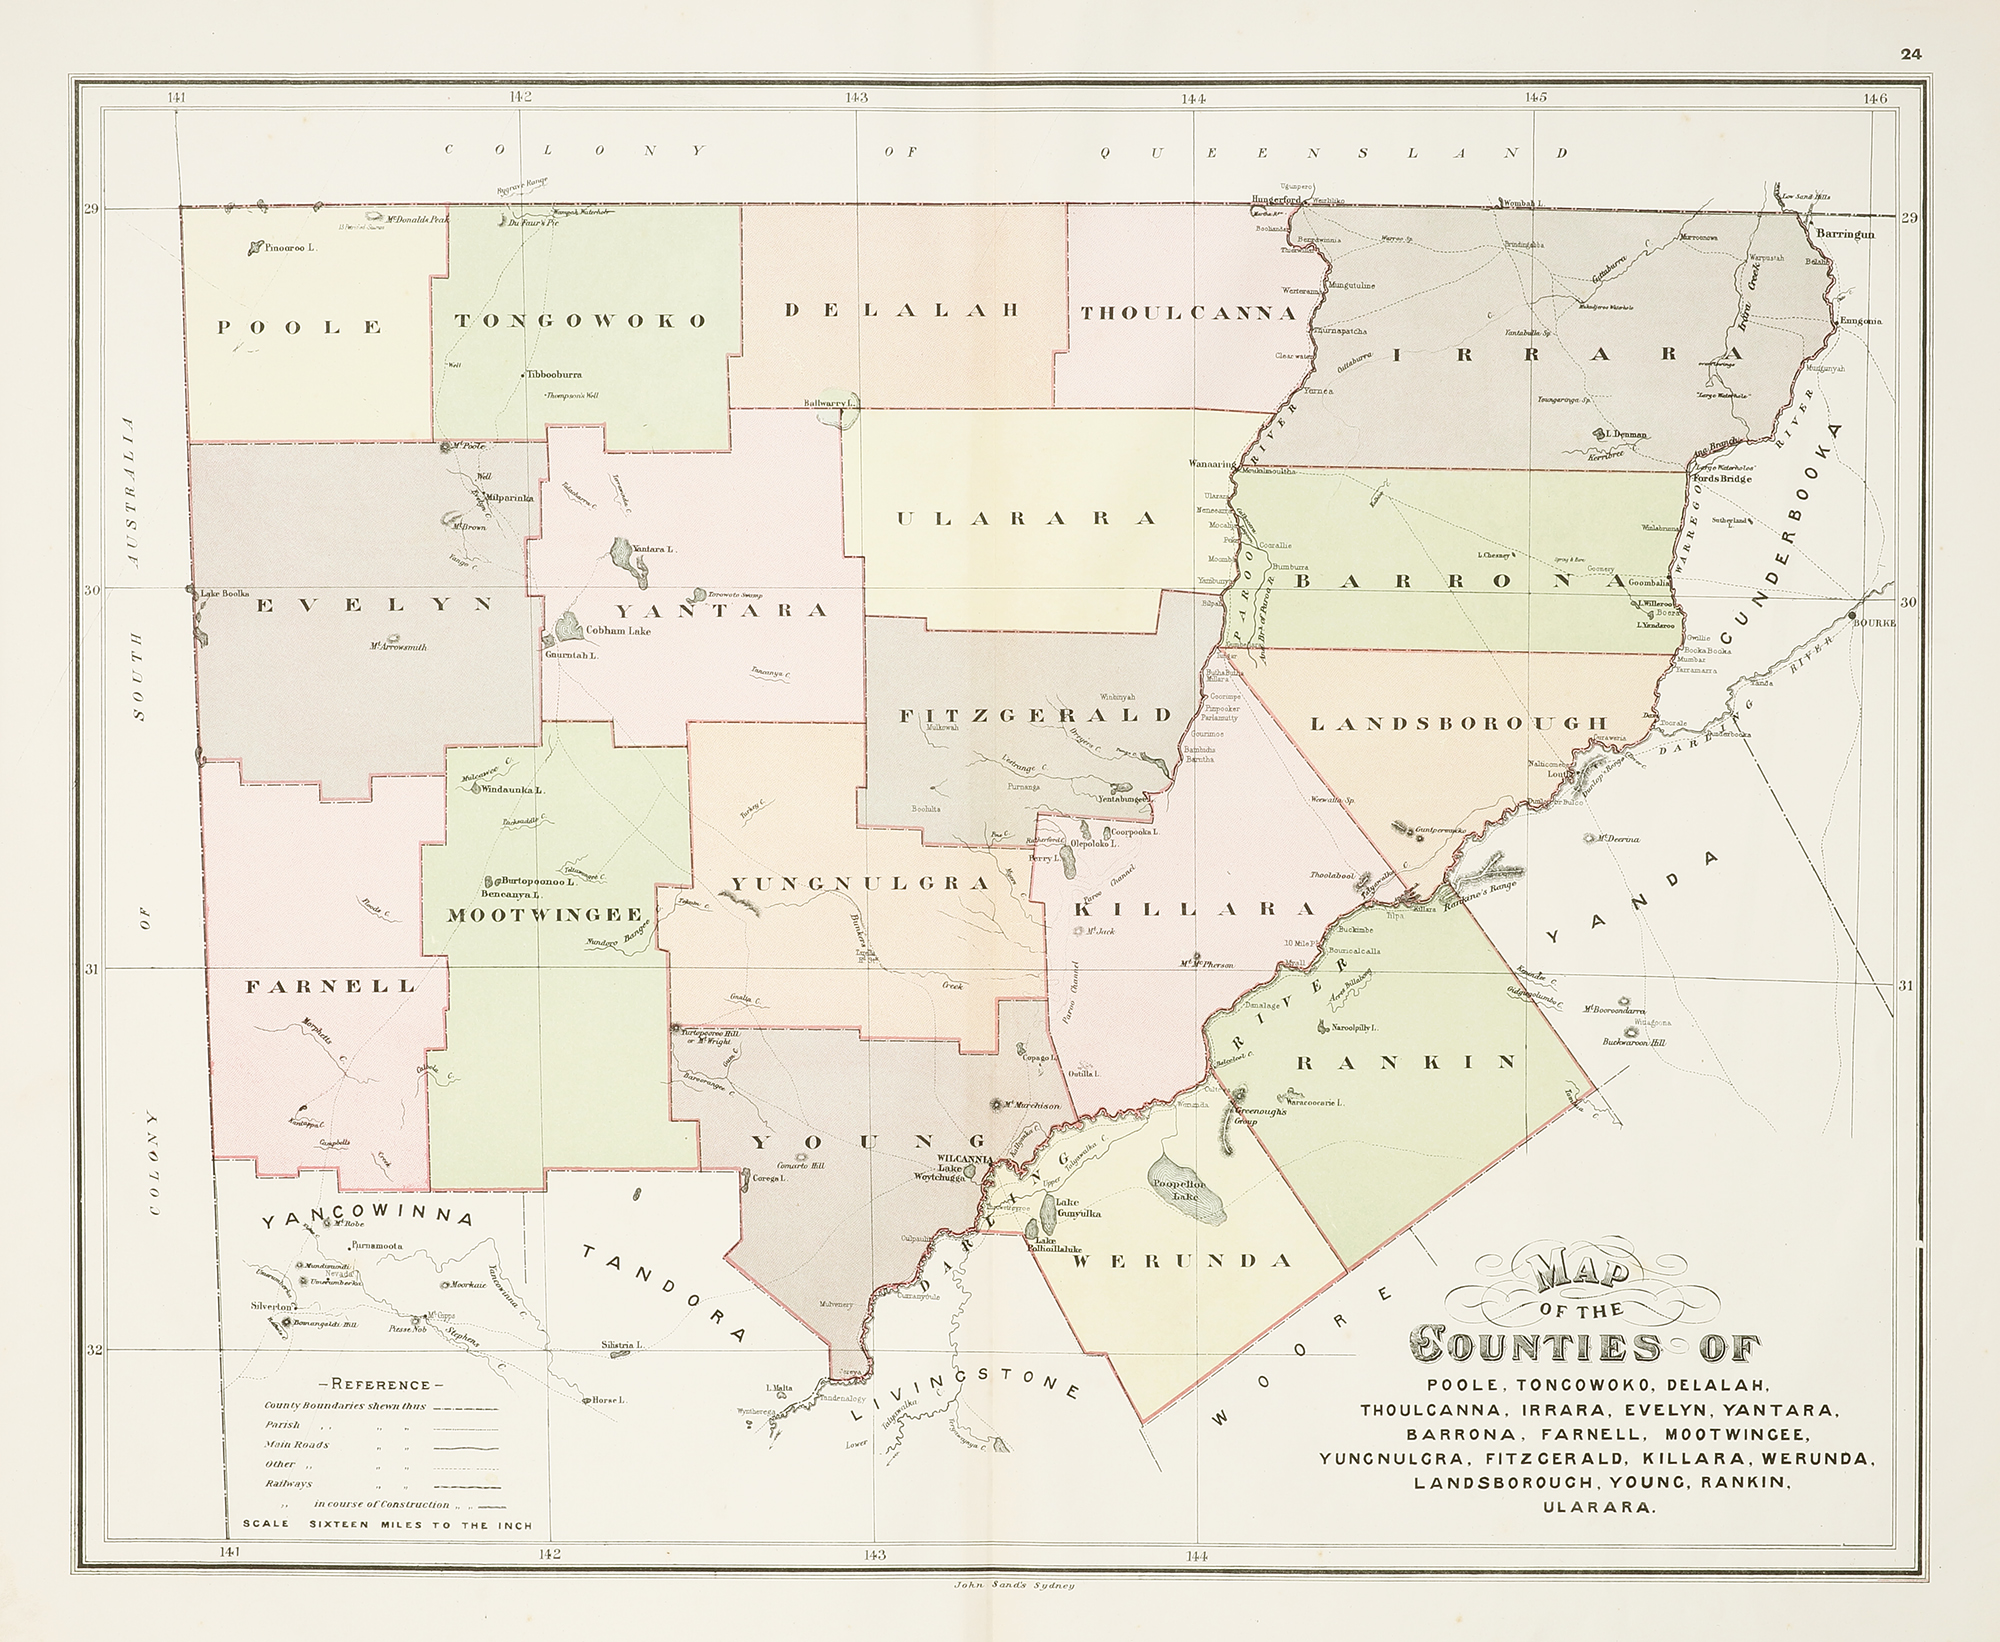 Map of the Counties of Poole, Toncowoko, Delalah, Thoulcanna .... - Antique Map from 1886